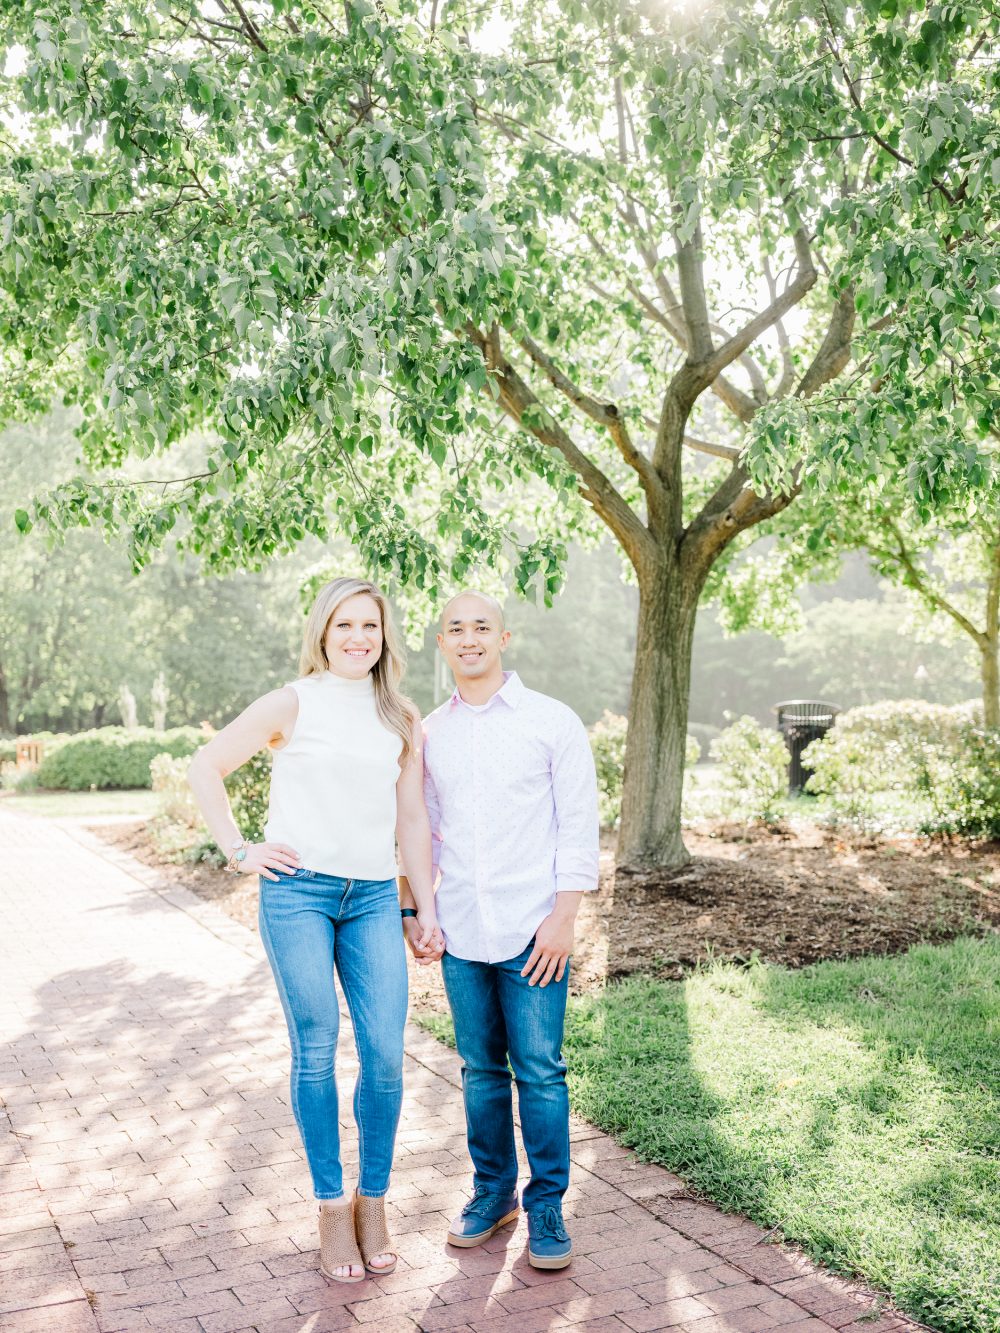 A light and airy engagement session at Quiet Waters Park in Annapolis, Maryland